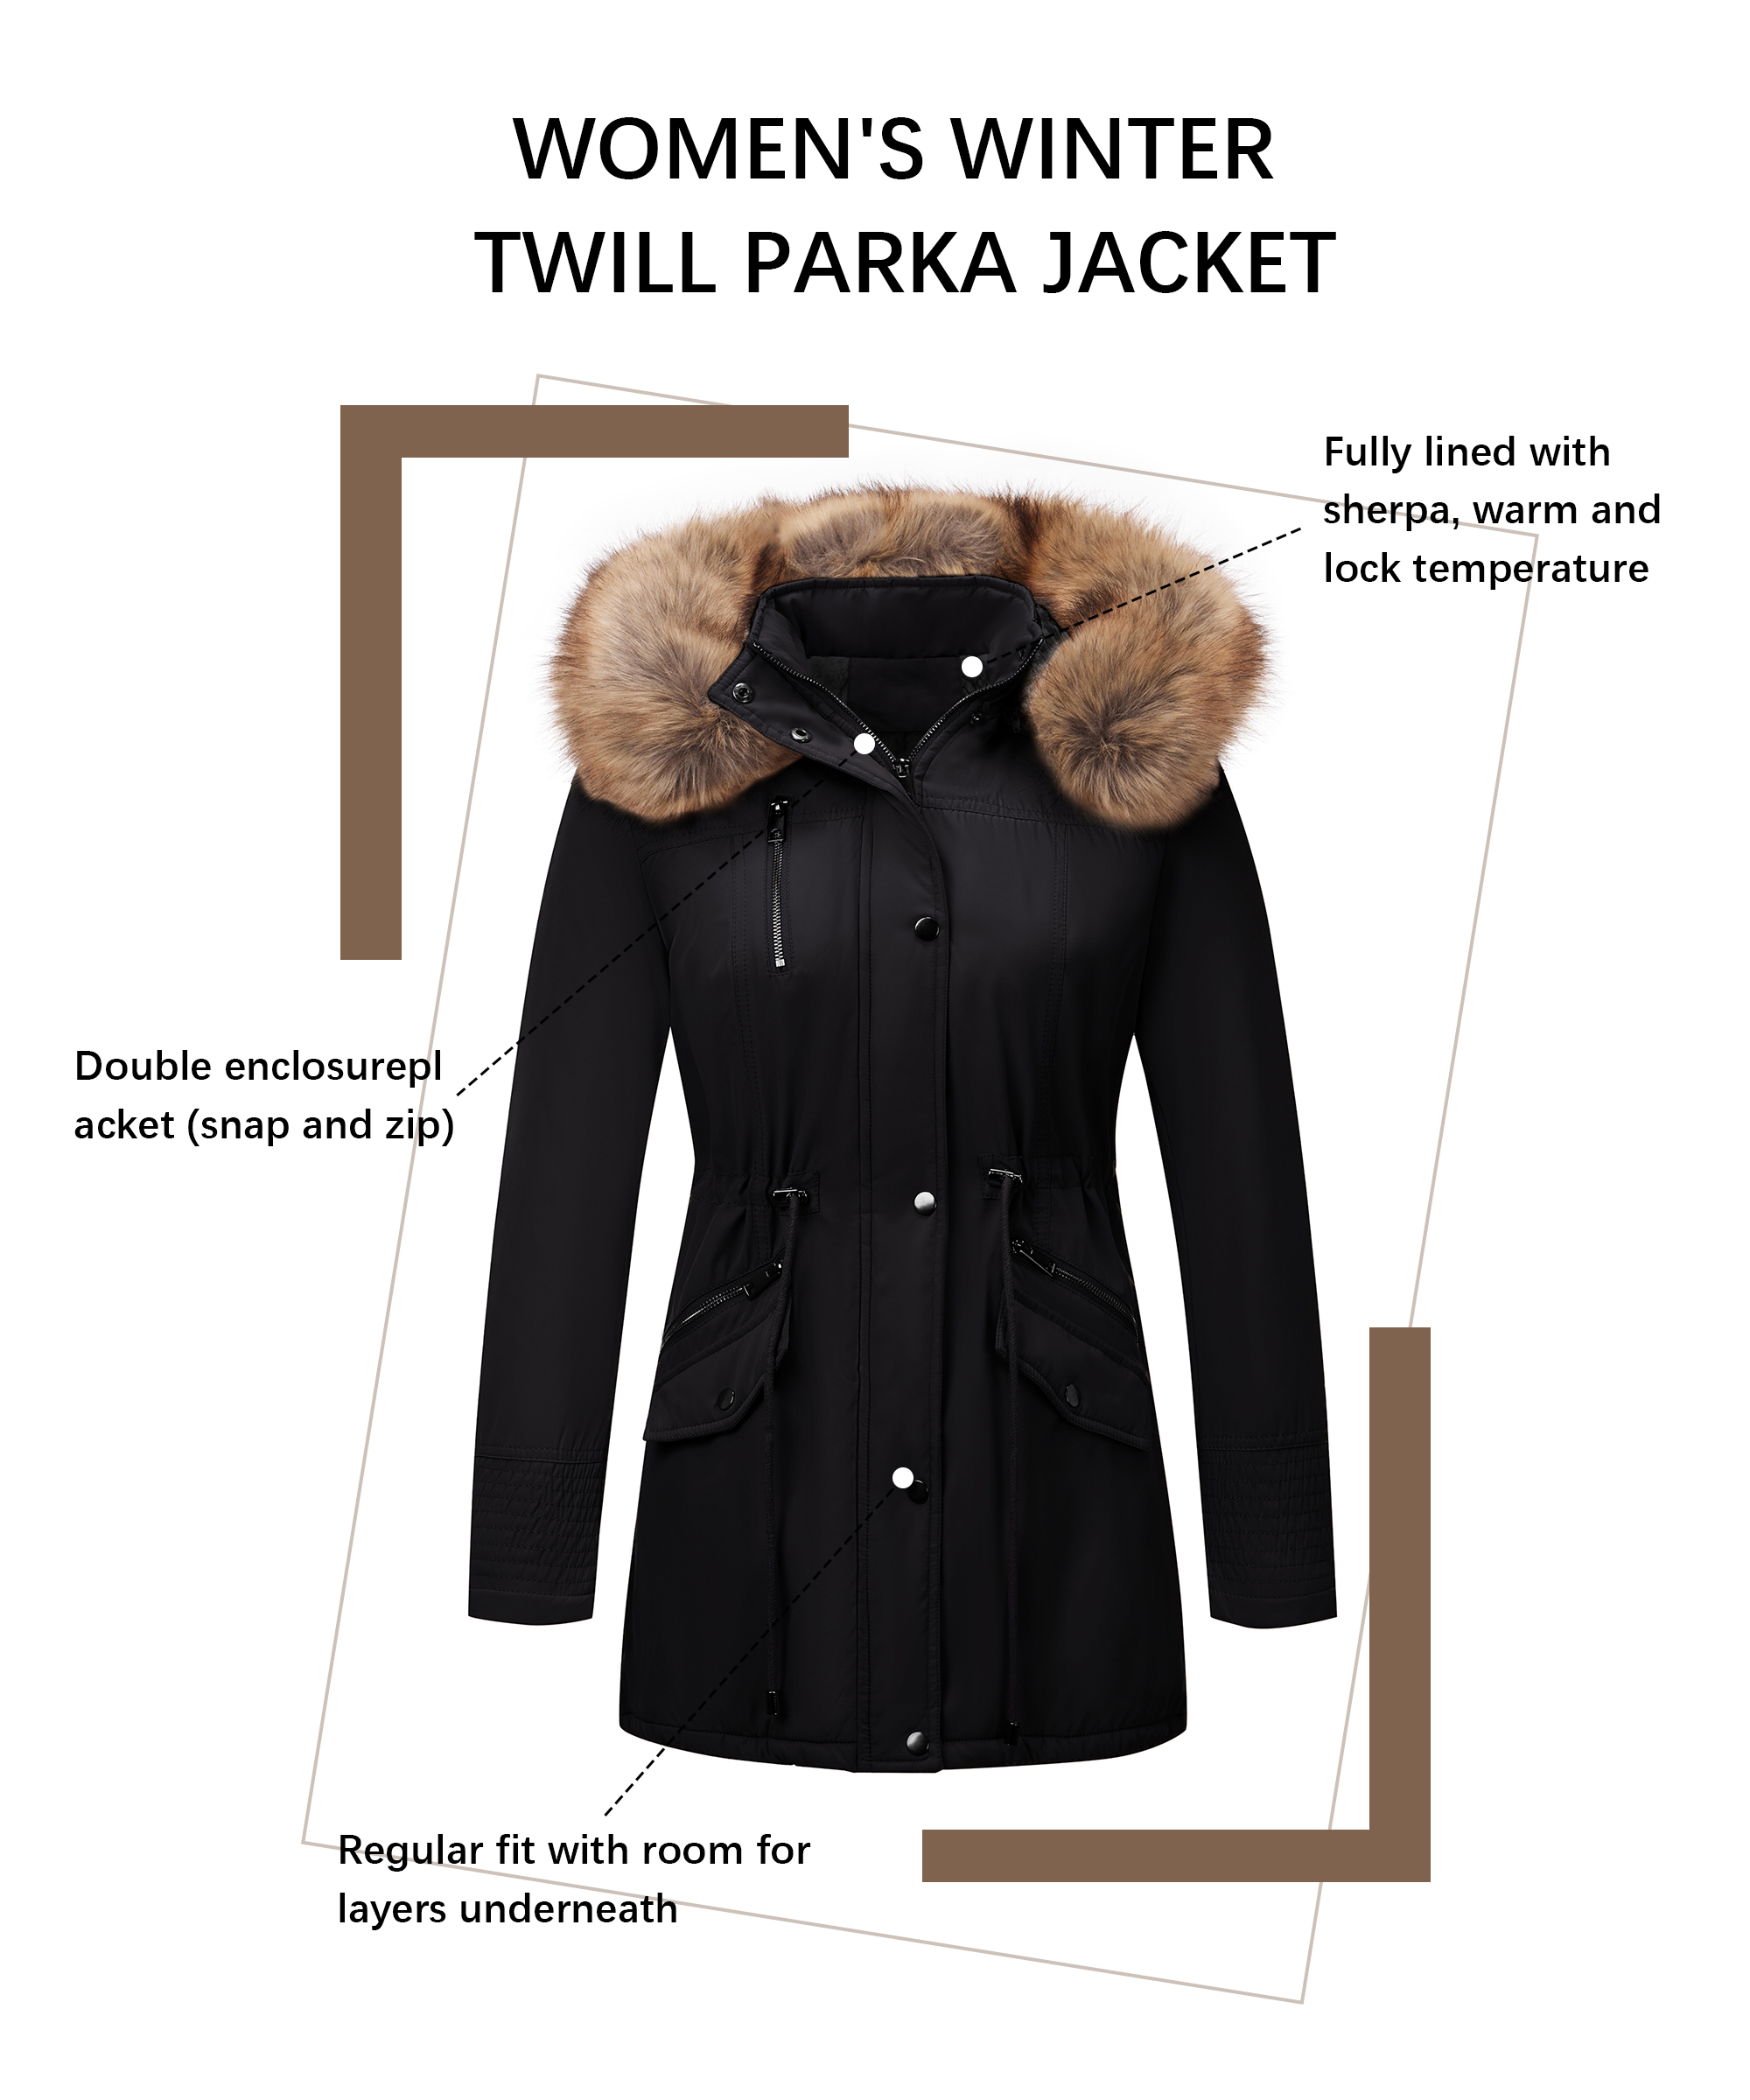 Giolshon Women's Twill Parka Jacket with Faux Fur Collar,Warm Winter Coat for Women Fall and Winter - image 2 of 6